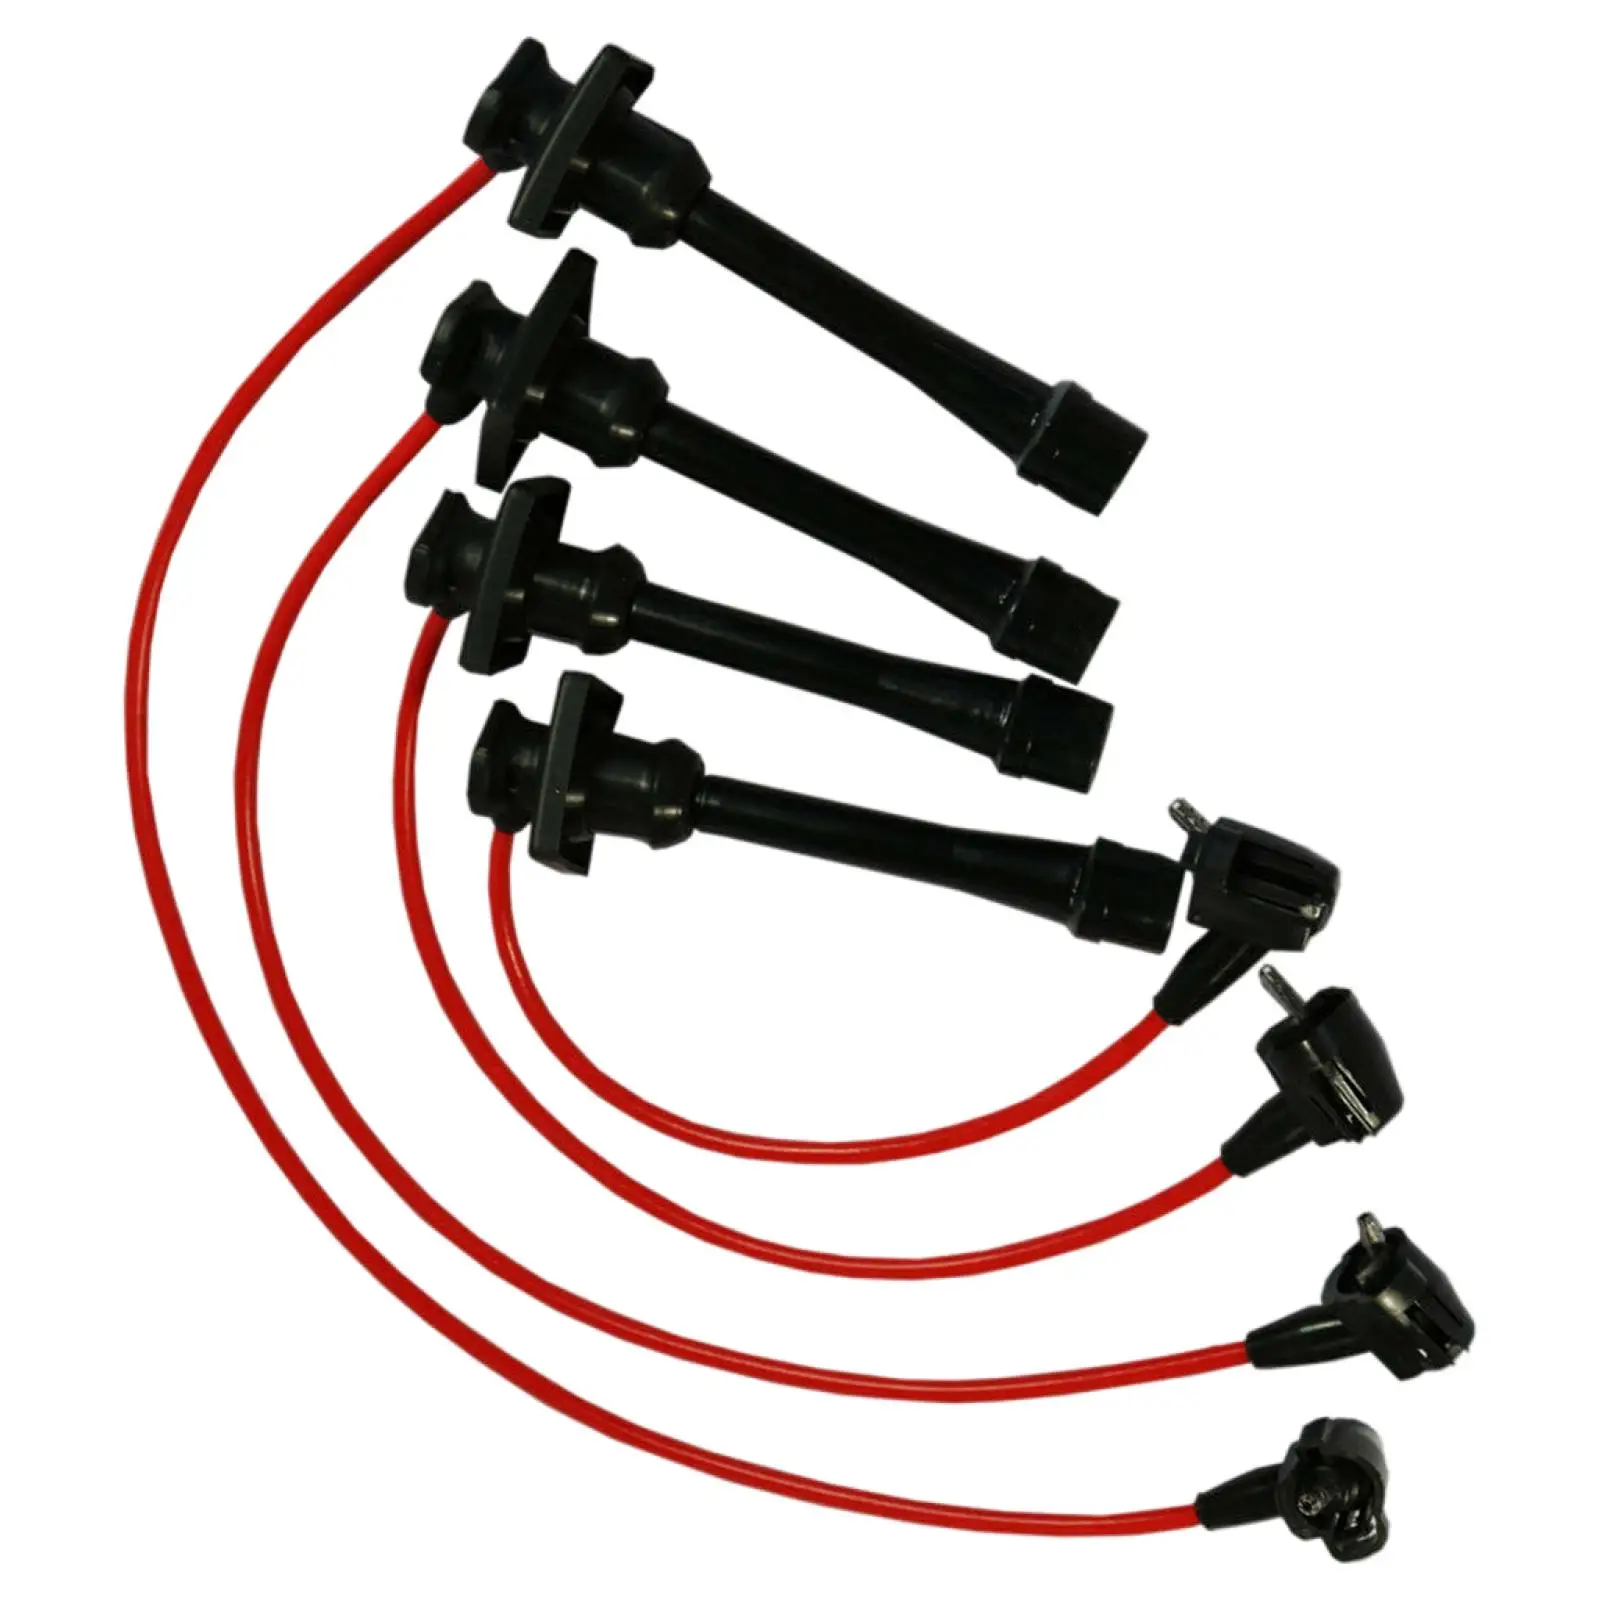 4Pcs Spark Plug Wires Set 90919-22327 Silicone Ignition Cable for 1993-1997